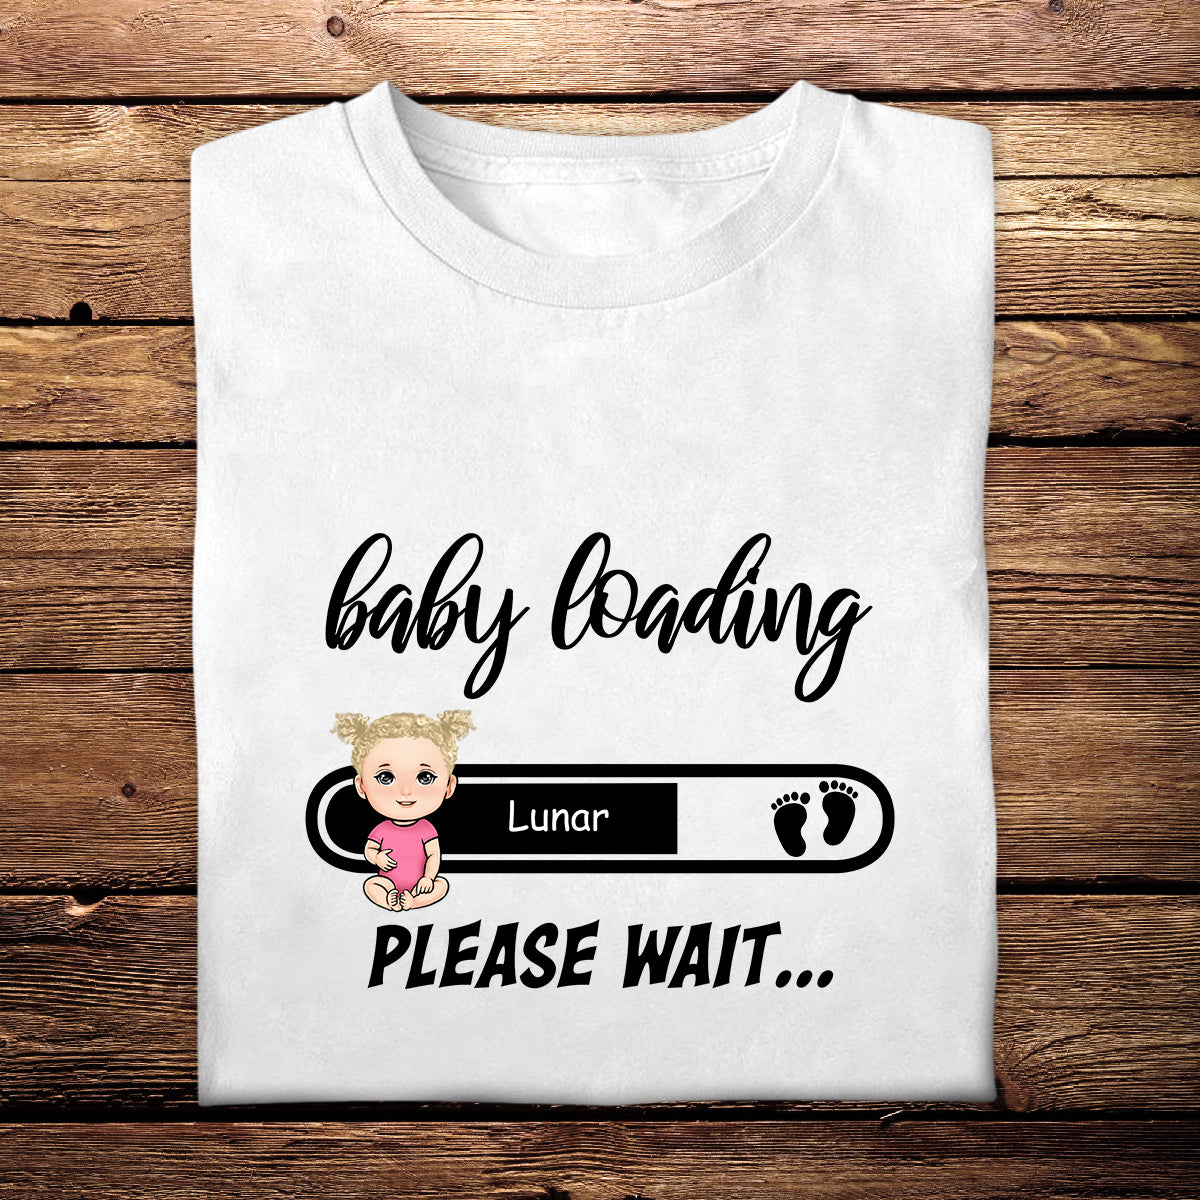 Baby Loading Please Wait - Personalized Shirt - Gift For New Mom, Soon To Be Mom, Expecting Mom, Mother's Day